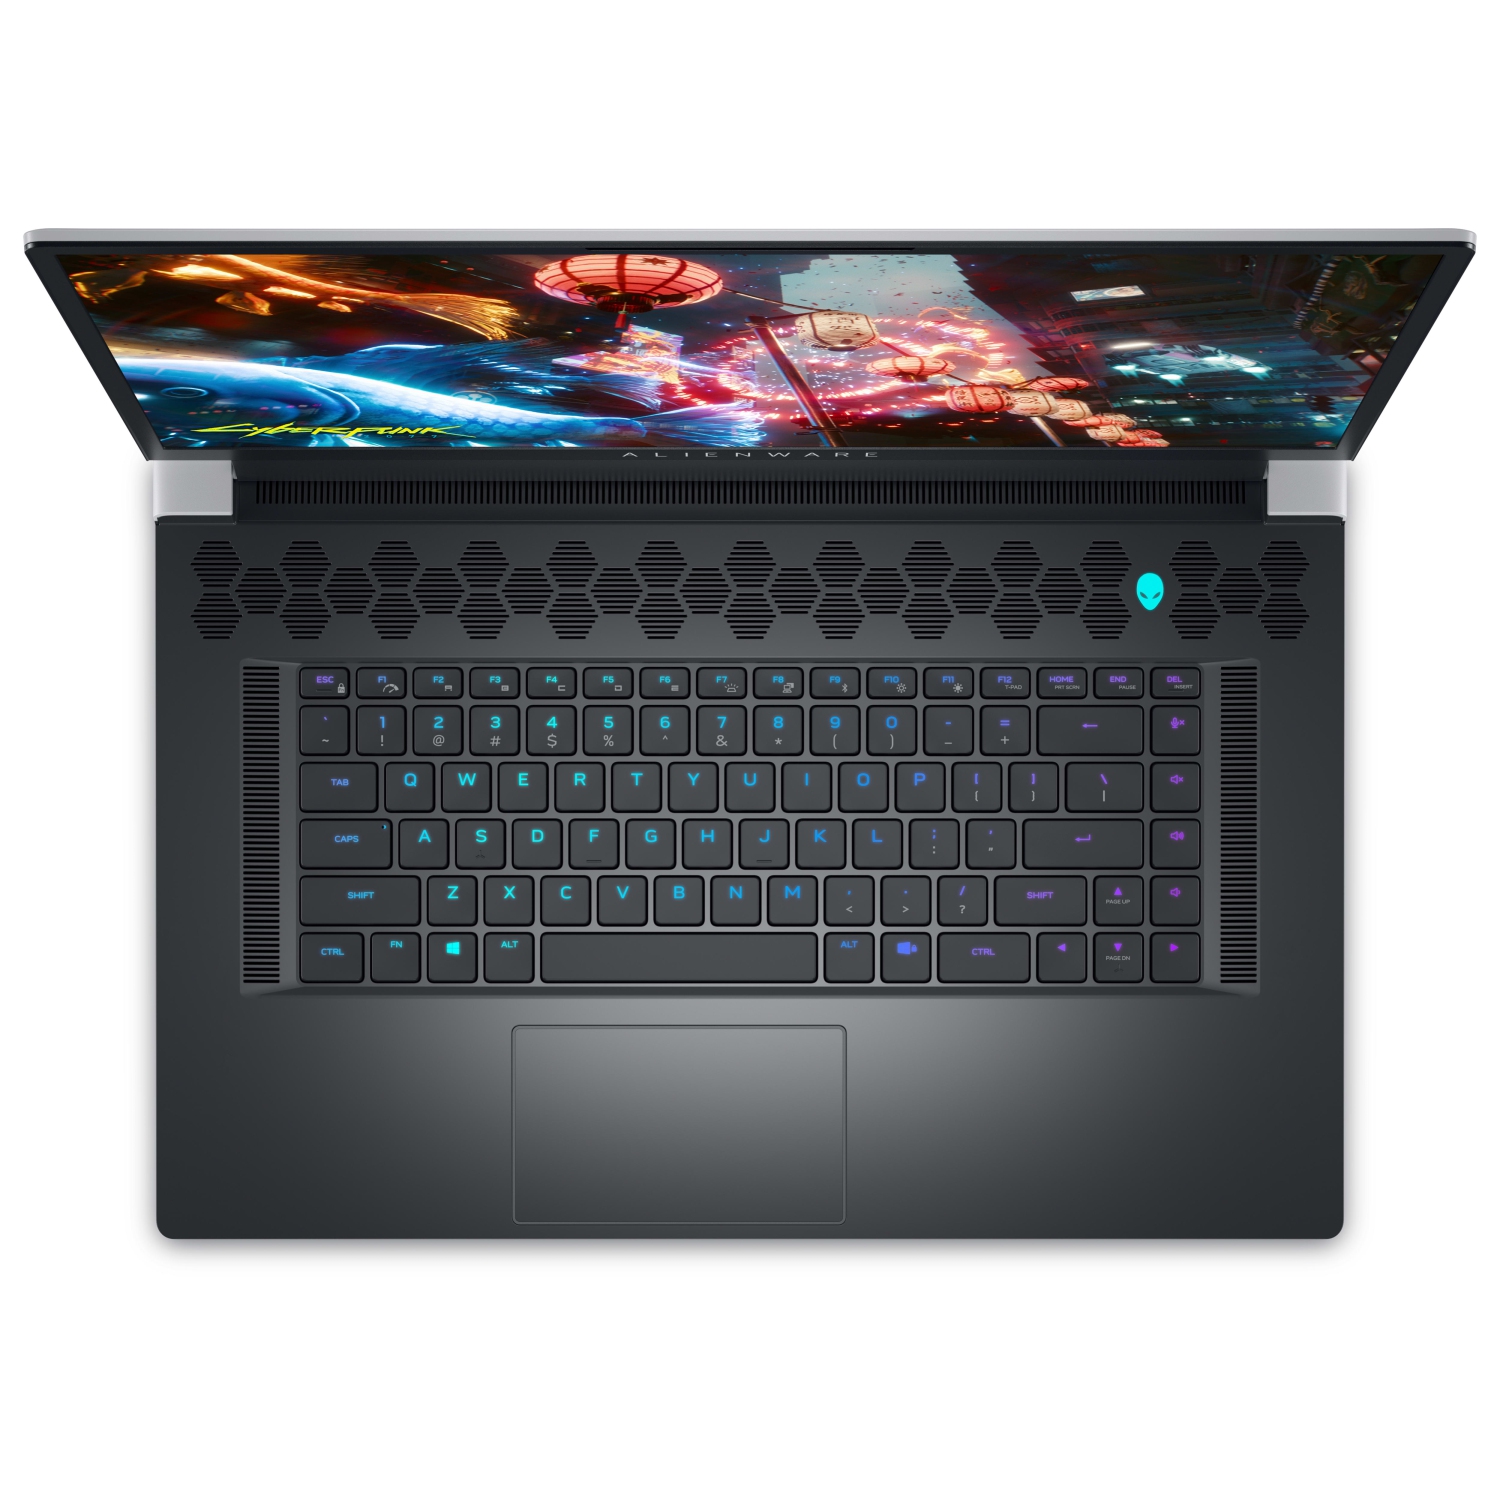 Refurbished (Excellent) – Dell Alienware X17 R2 Gaming Laptop (2022) | 17.3" FHD | Core i9 - 8TB SSD - 32GB RAM - 3070 Ti | 14 Cores @ 5 GHz - 12th Gen CPU - 8GB GDDR6X